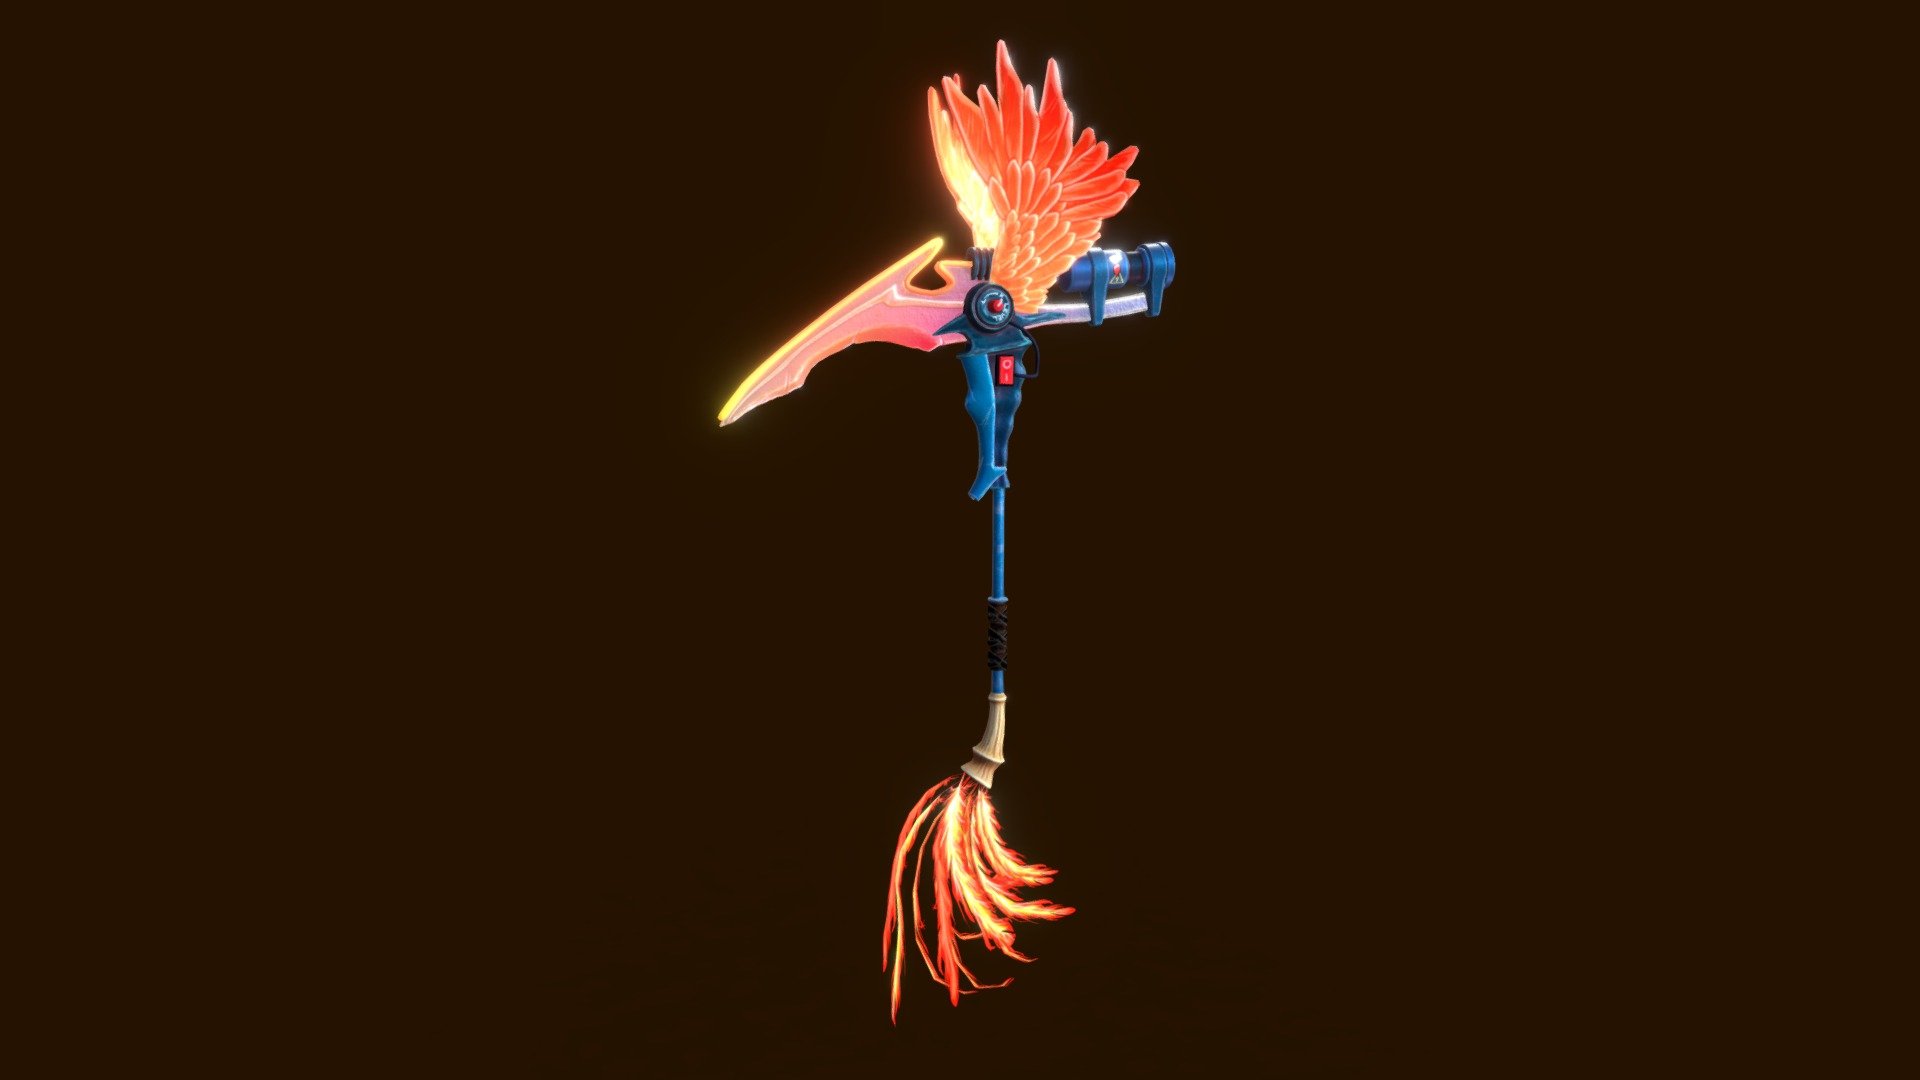 This is my first model on sketchfab and my first stylized 3d model, let me know if you like it!
https://www.artstation.com/artwork/Z51Gax - Phoenix Induction Scythe - 3D model by florianferrere 3d model